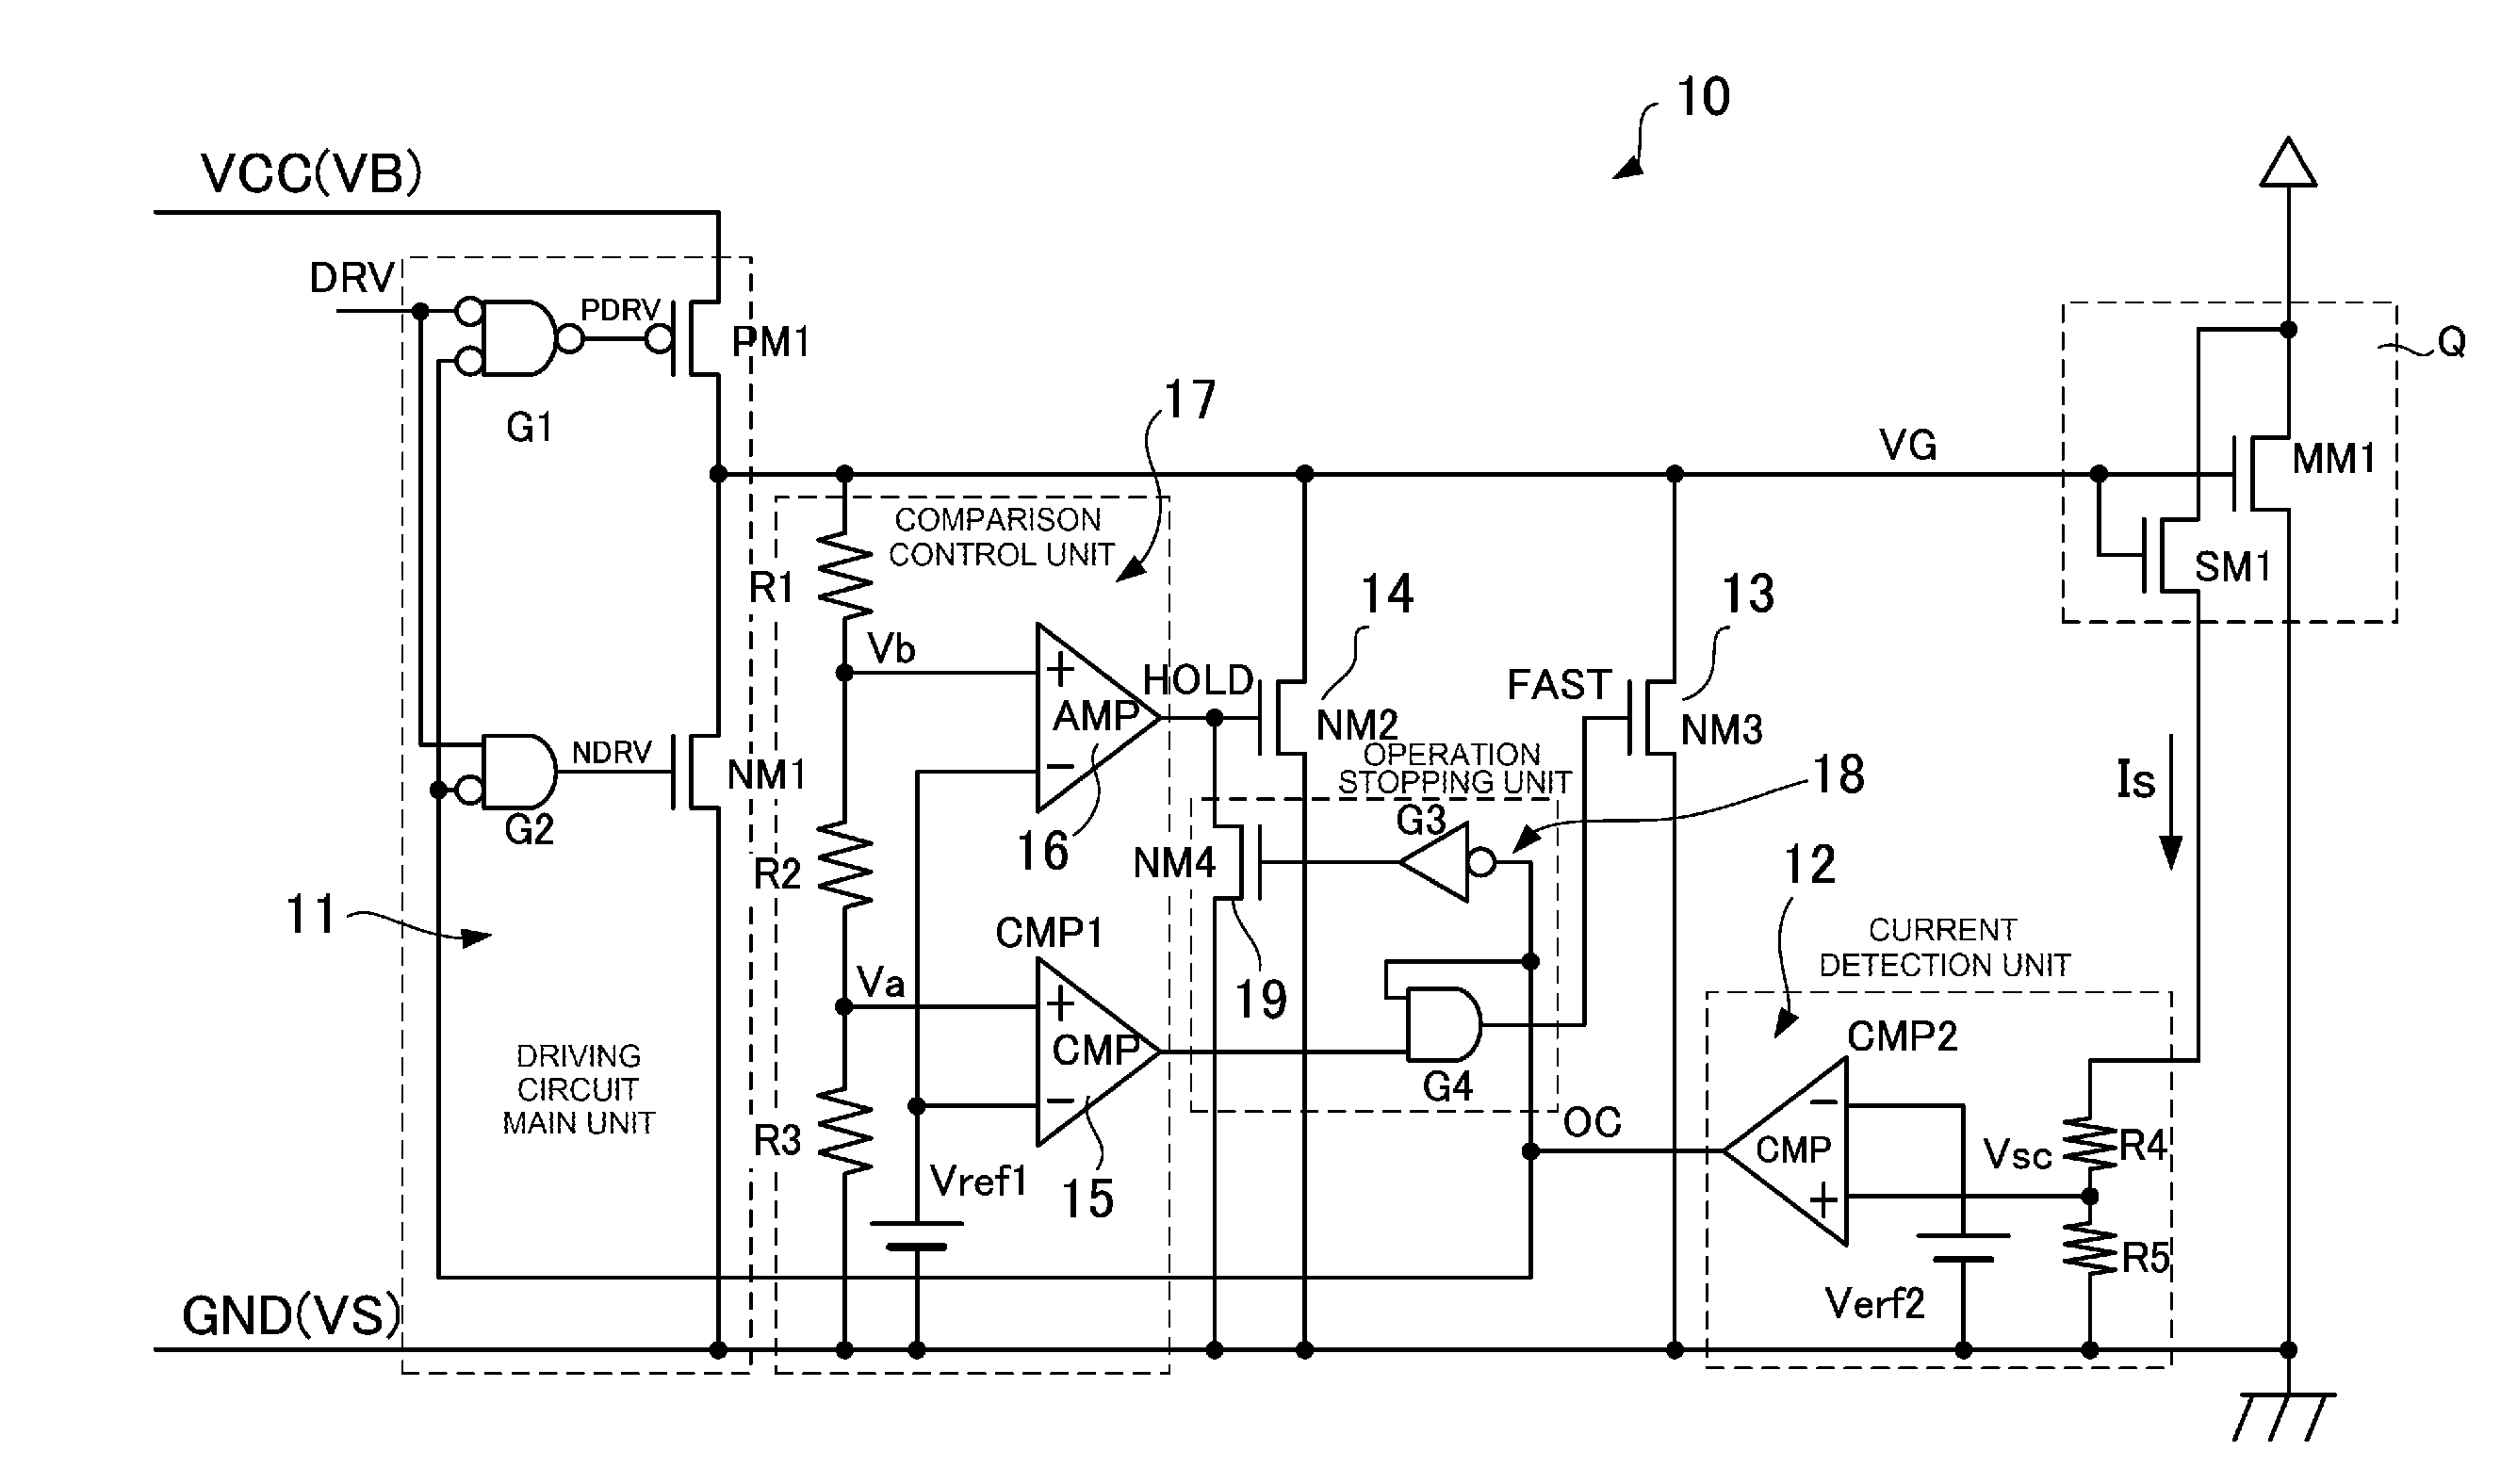 Switching element driving circuit